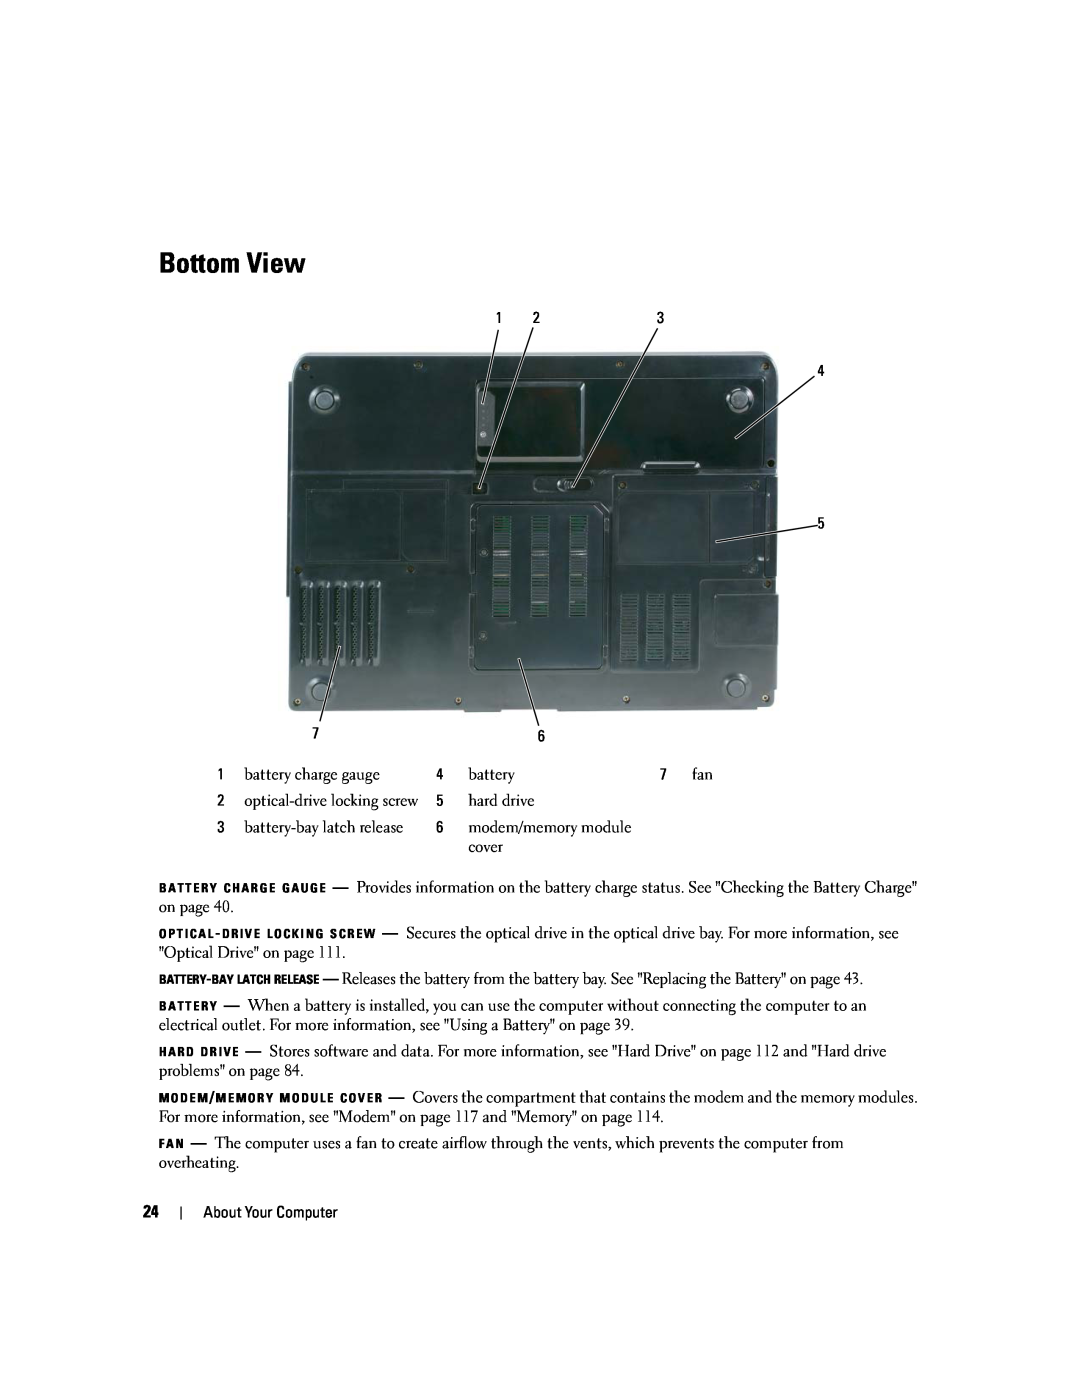 Dell PP20L owner manual Bottom View, About Your Computer 